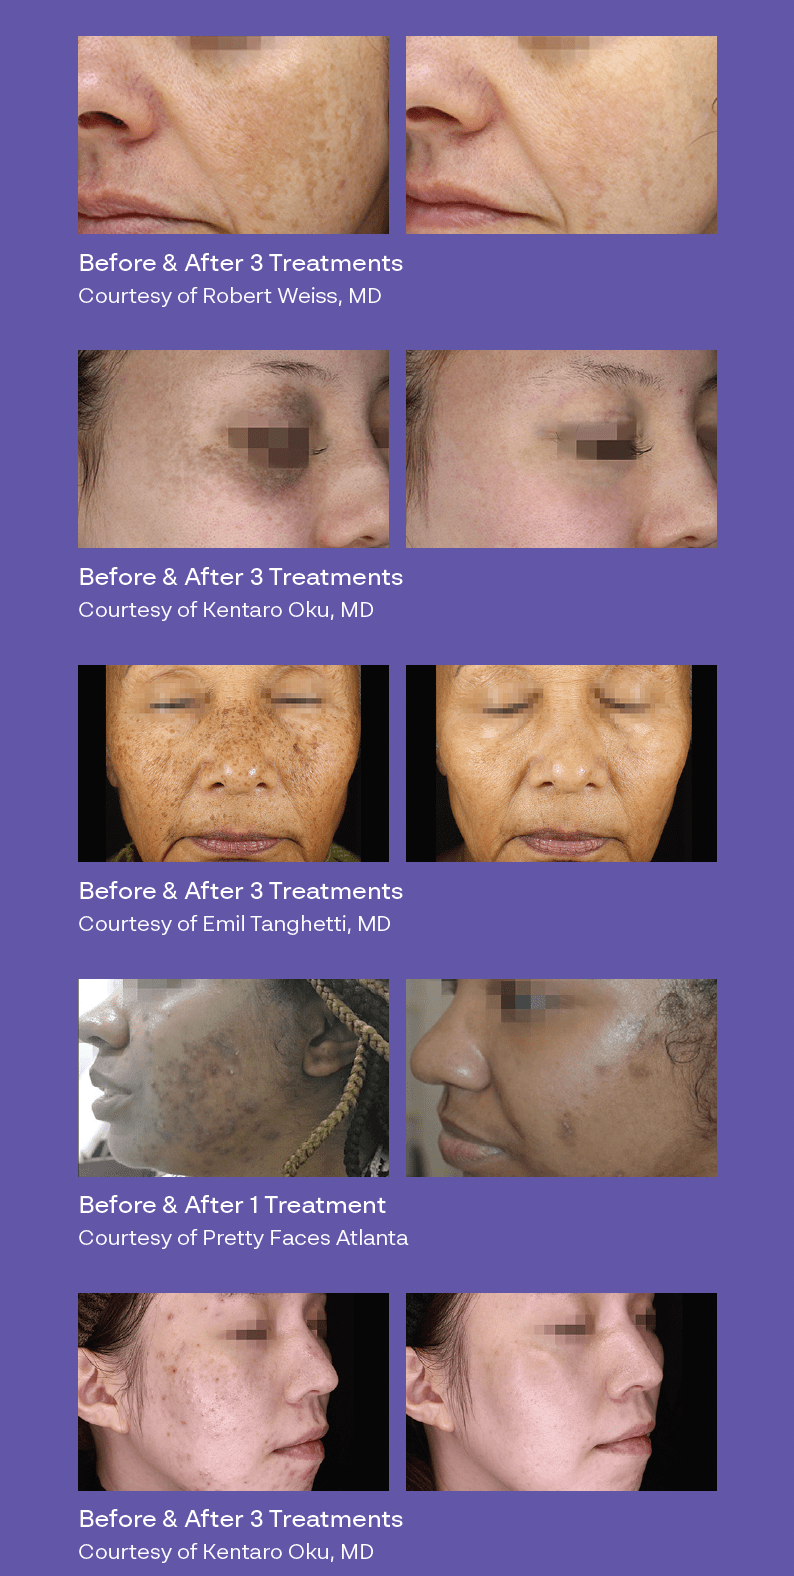 Before & After 4 treatments